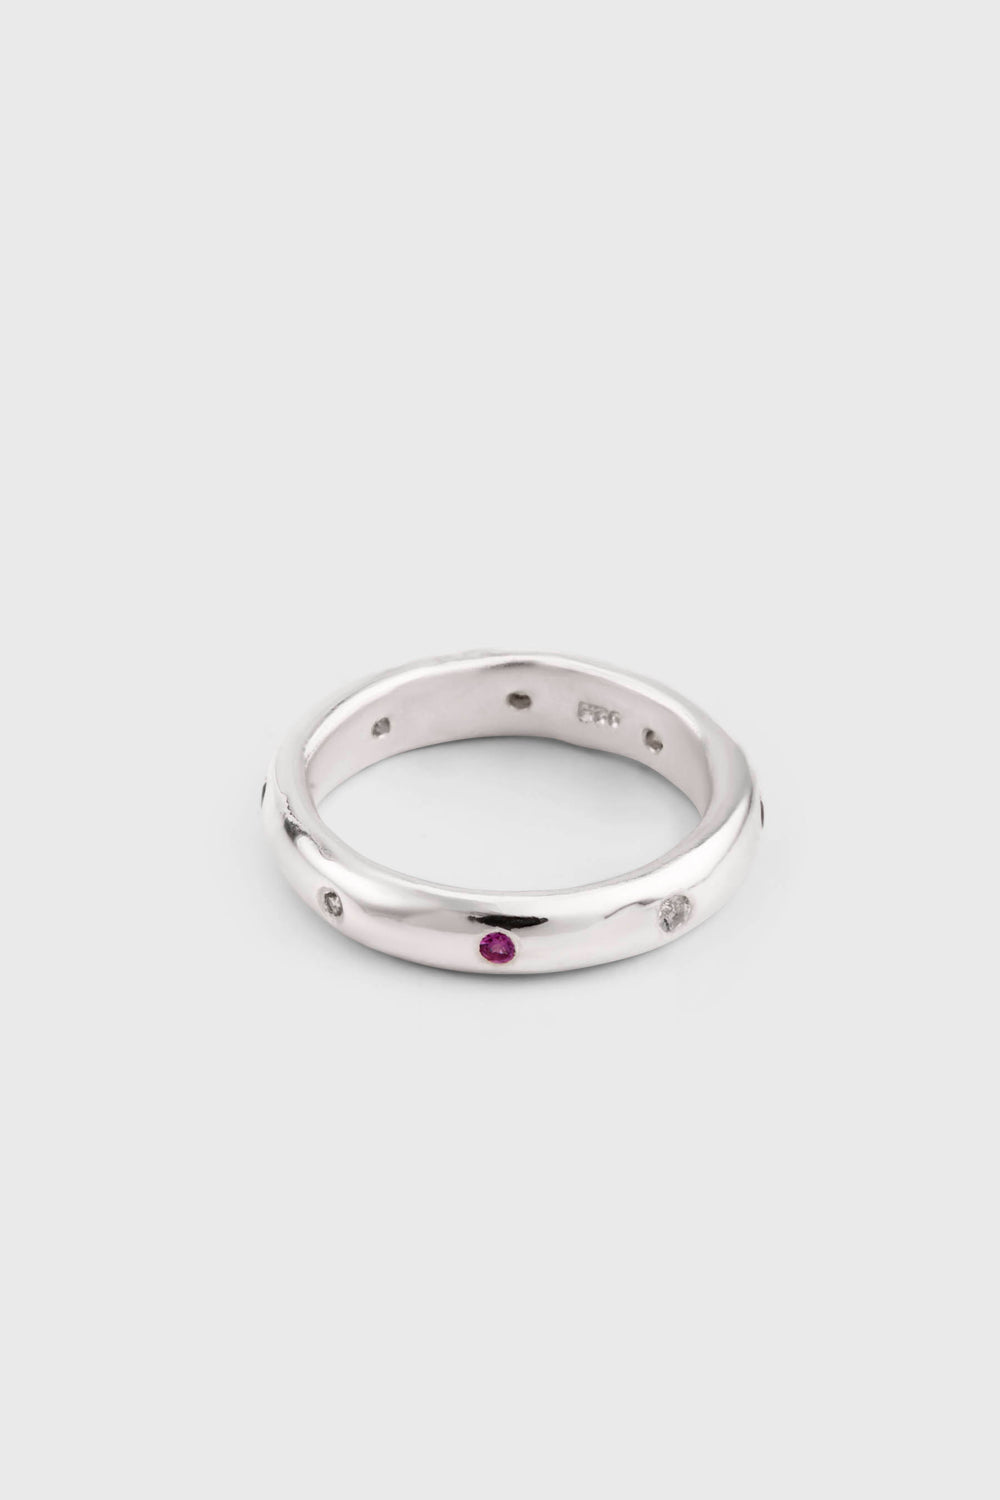 released from love rainbow sapphire band